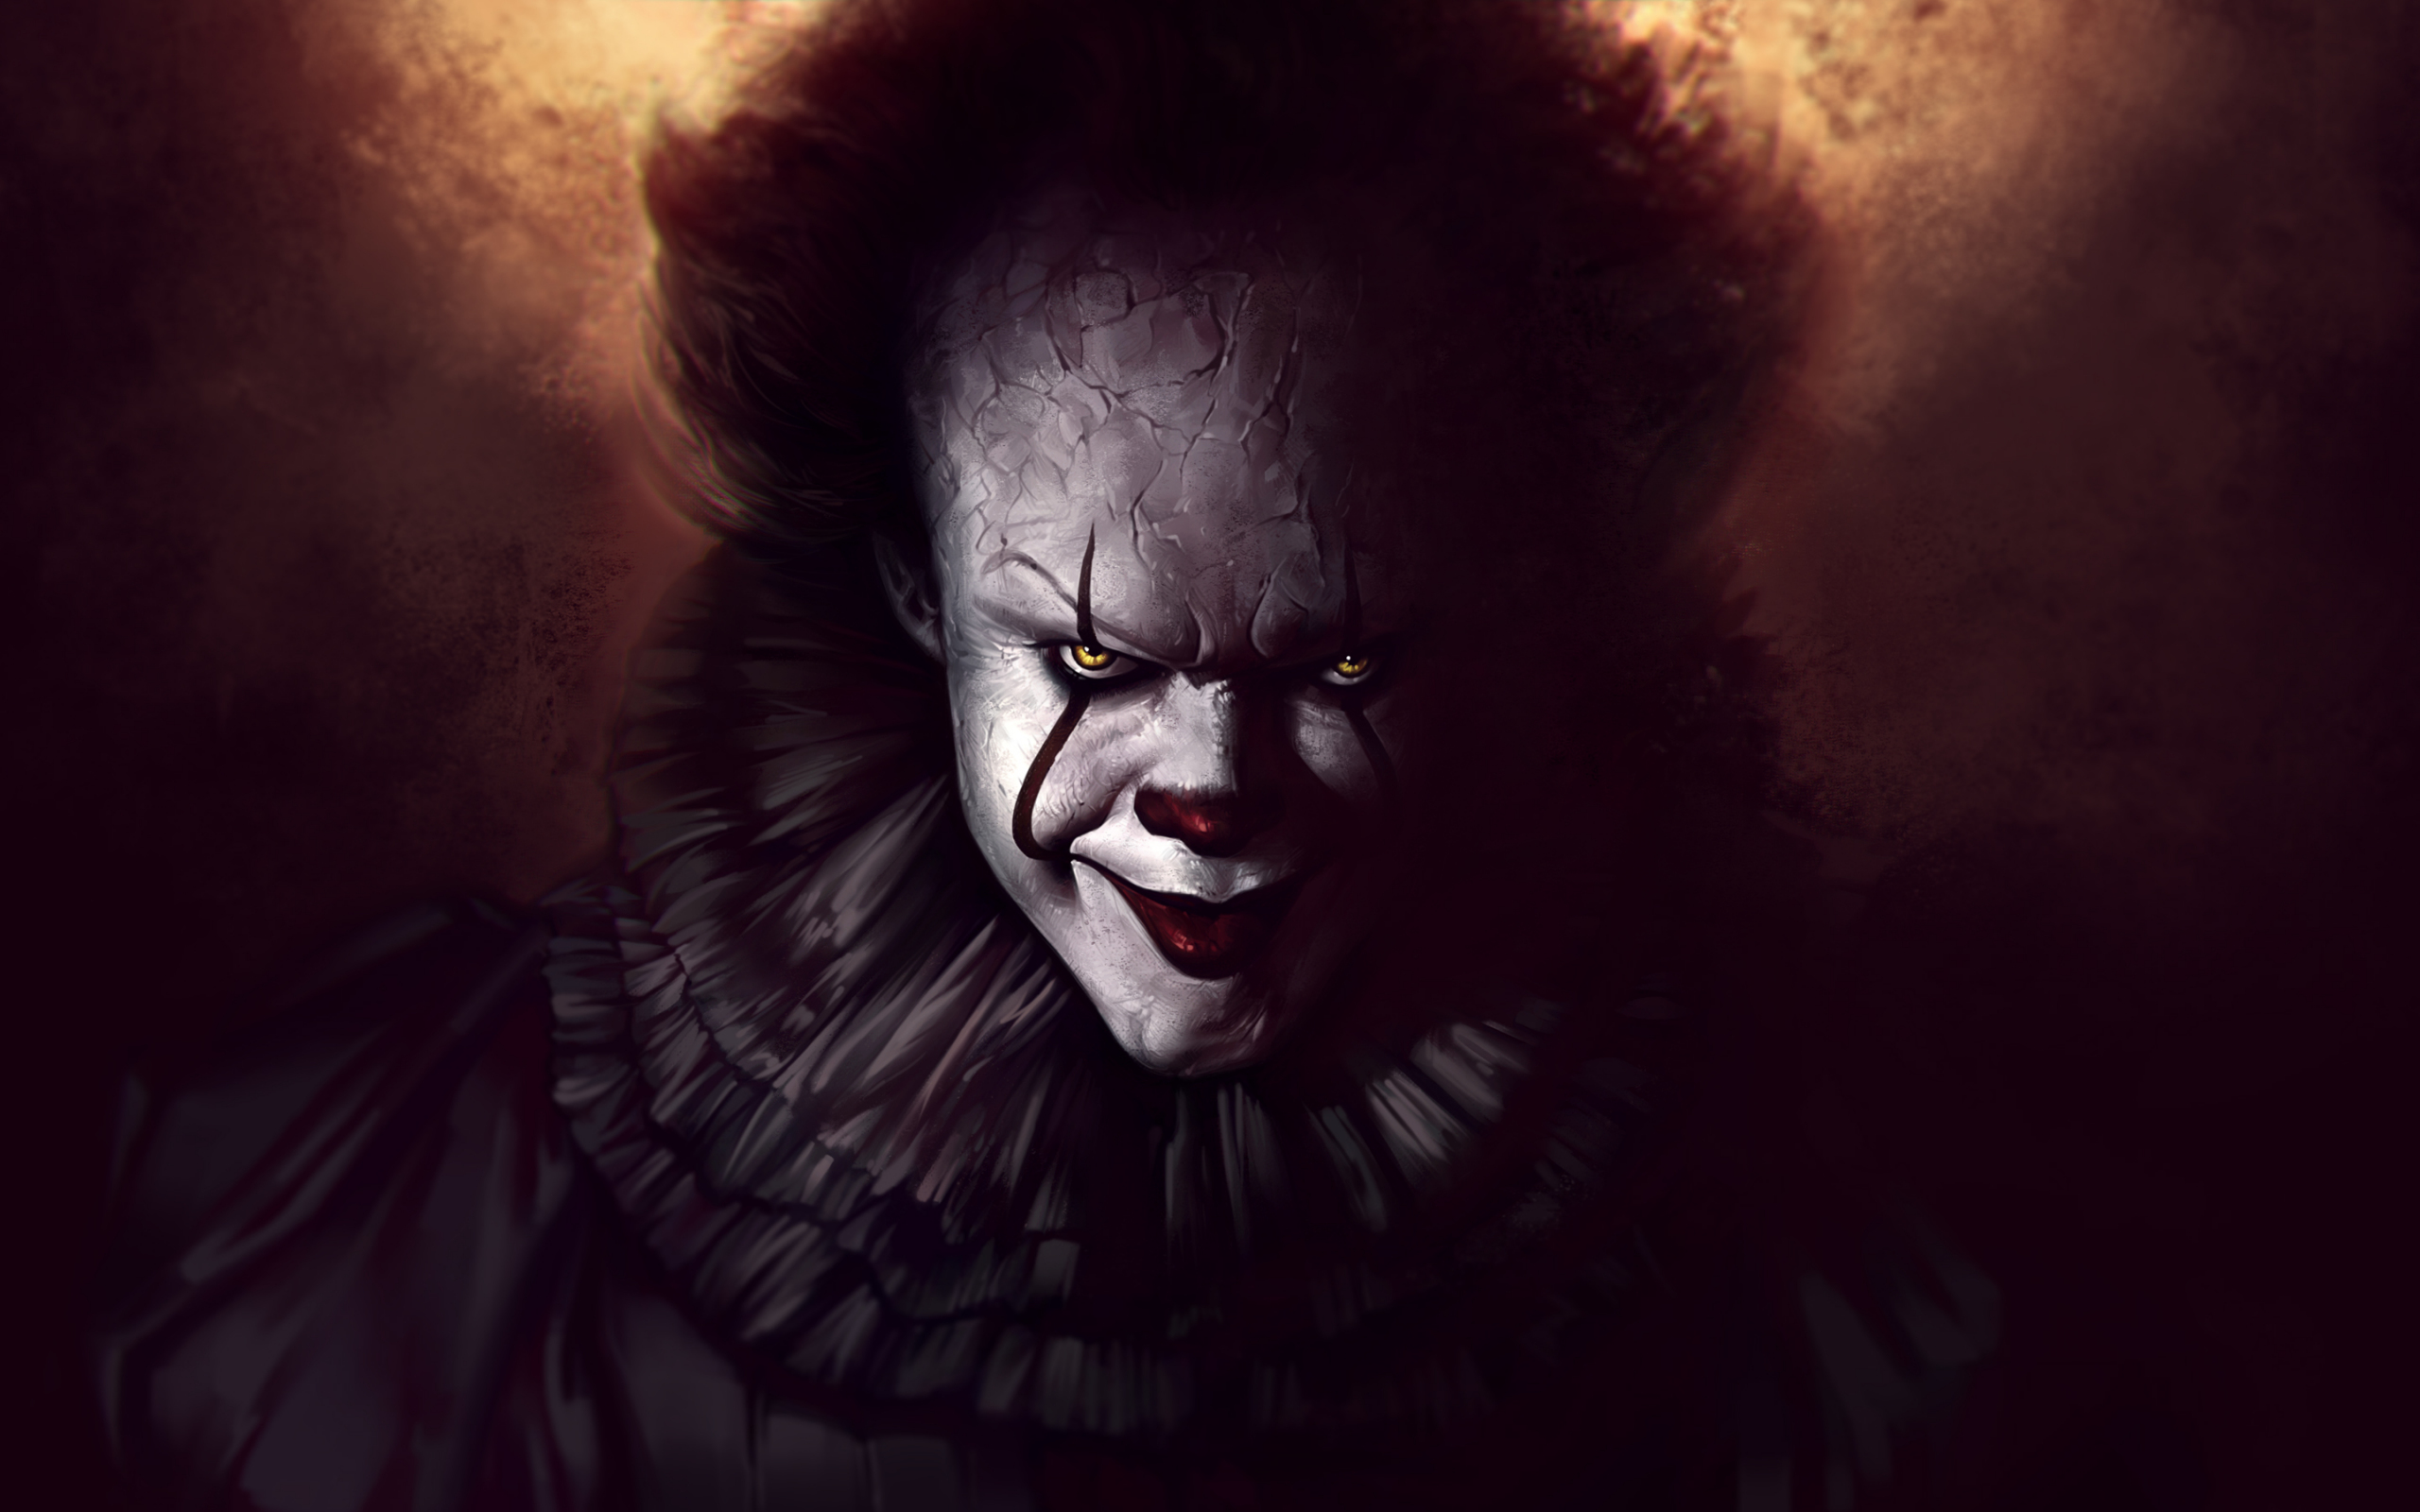 Download wallpaper 2560x1600 pennywise